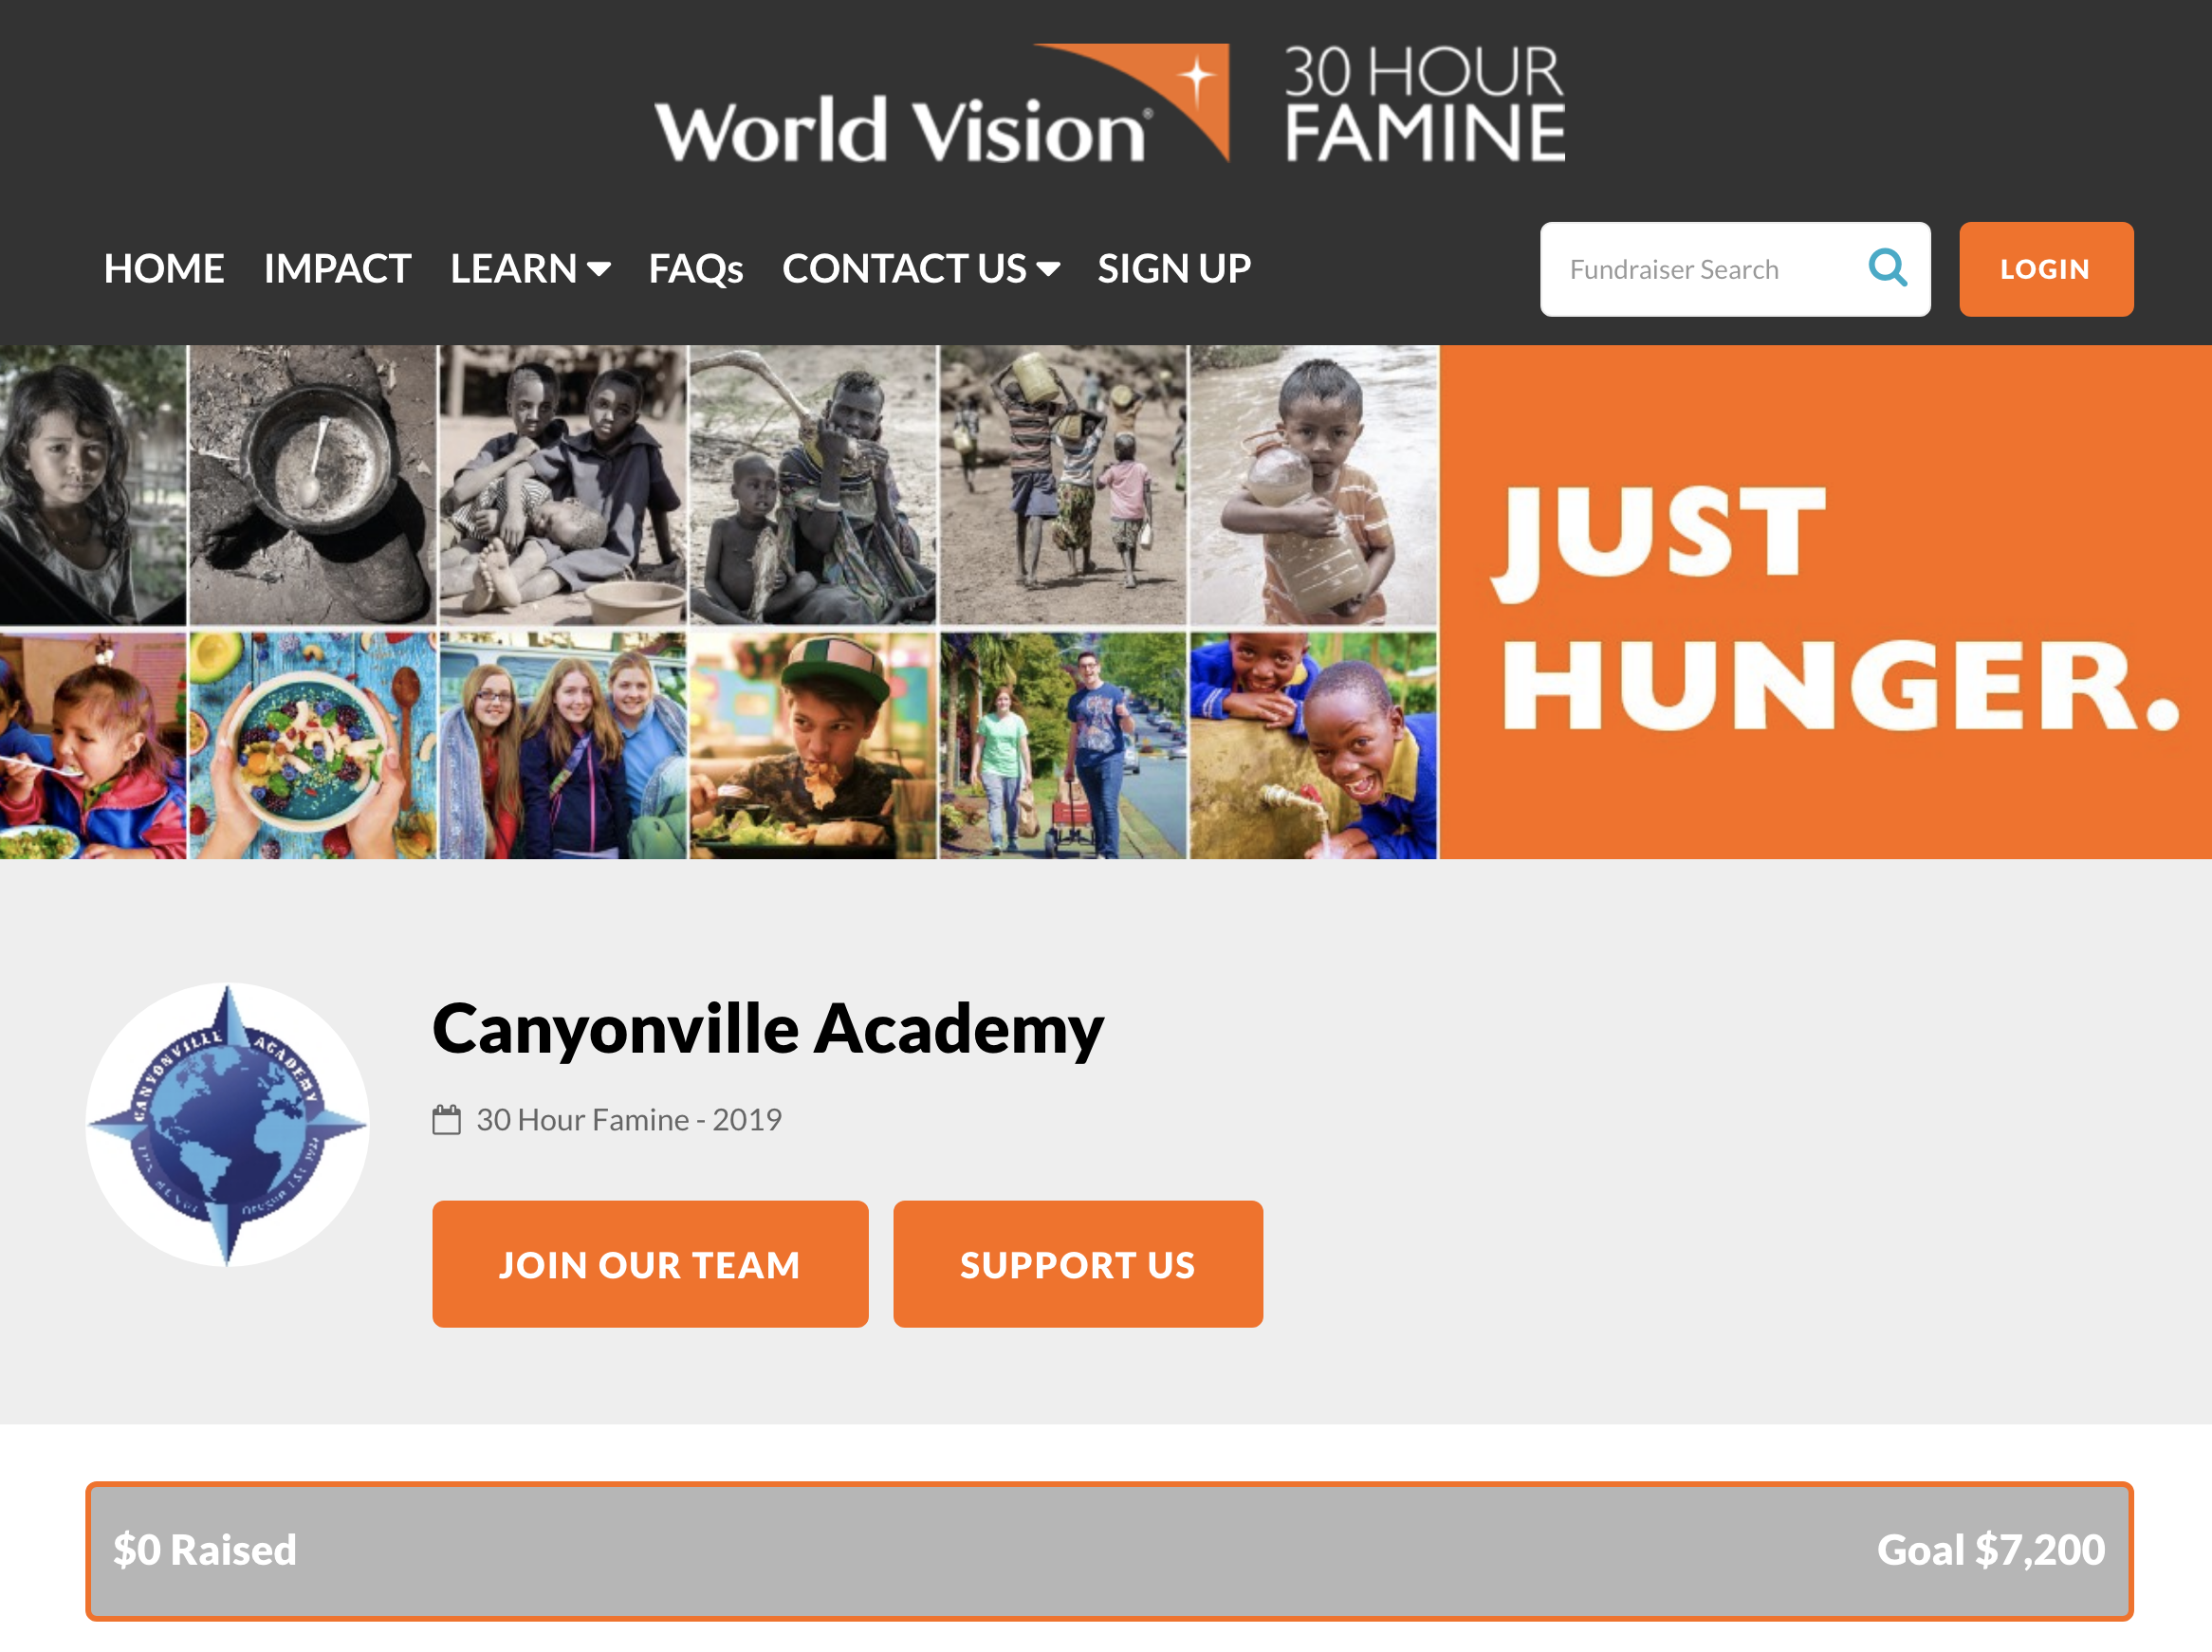 Christian boarding school, Canyonville Academy, students take part of 30 hour famine to help children.